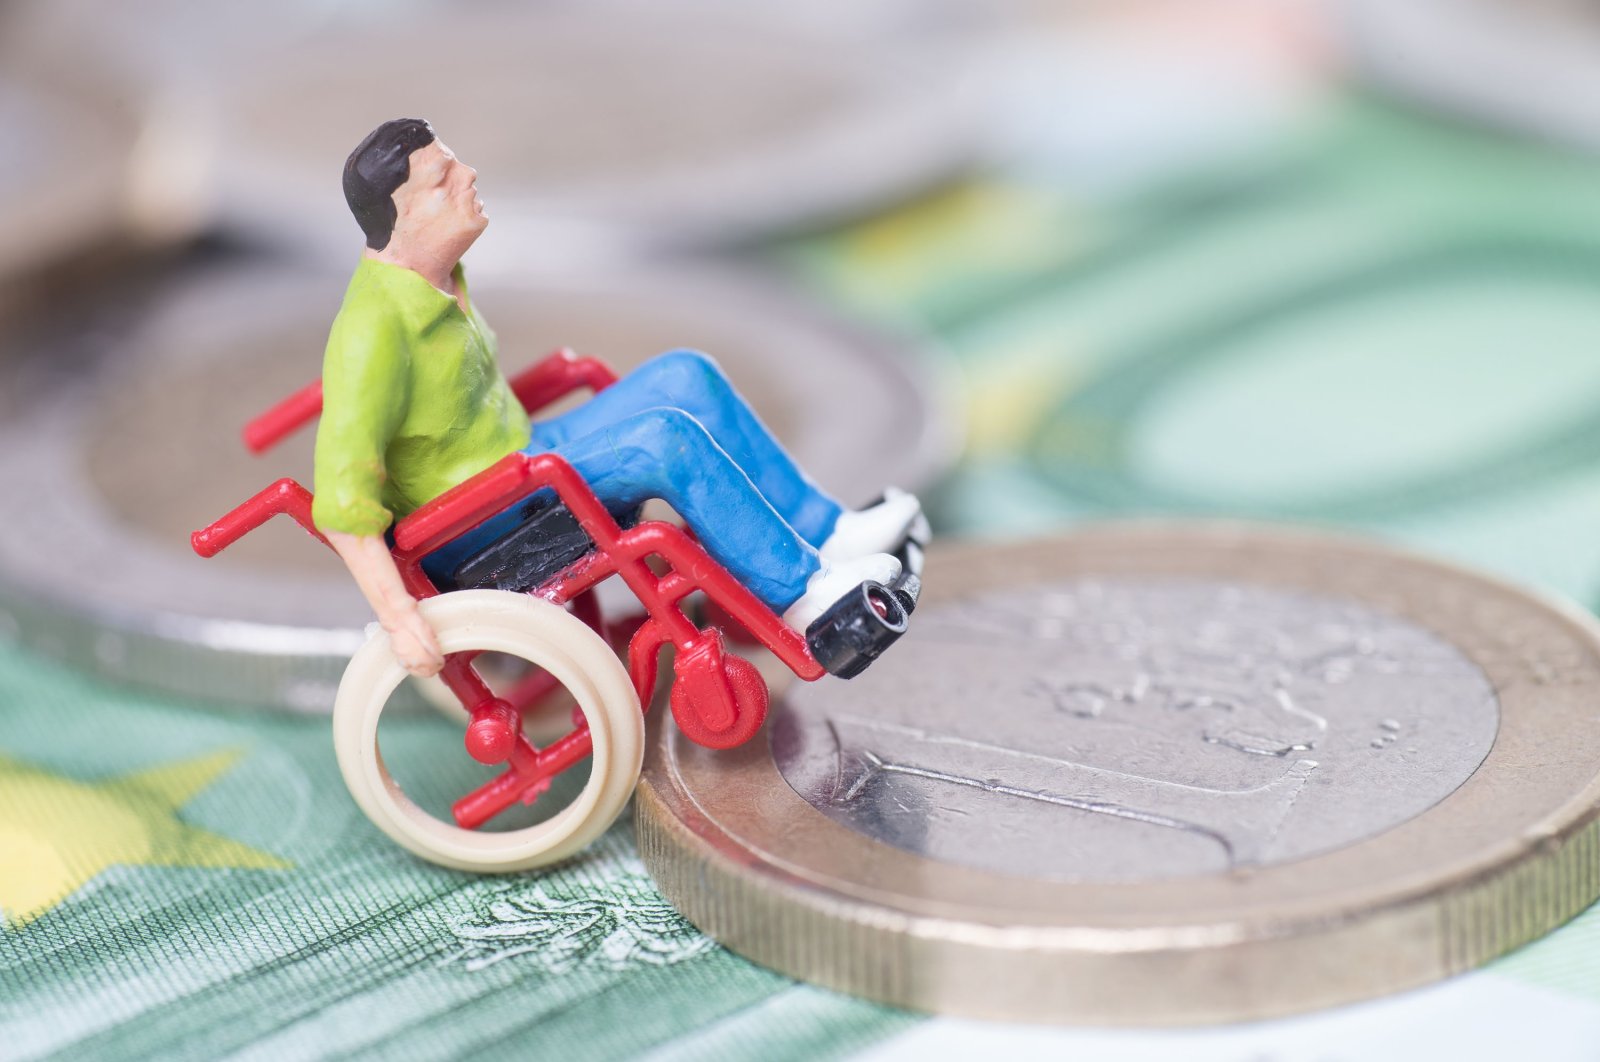 A figurine of a person in a wheelchair getting onto a coin. (Shutterstock)